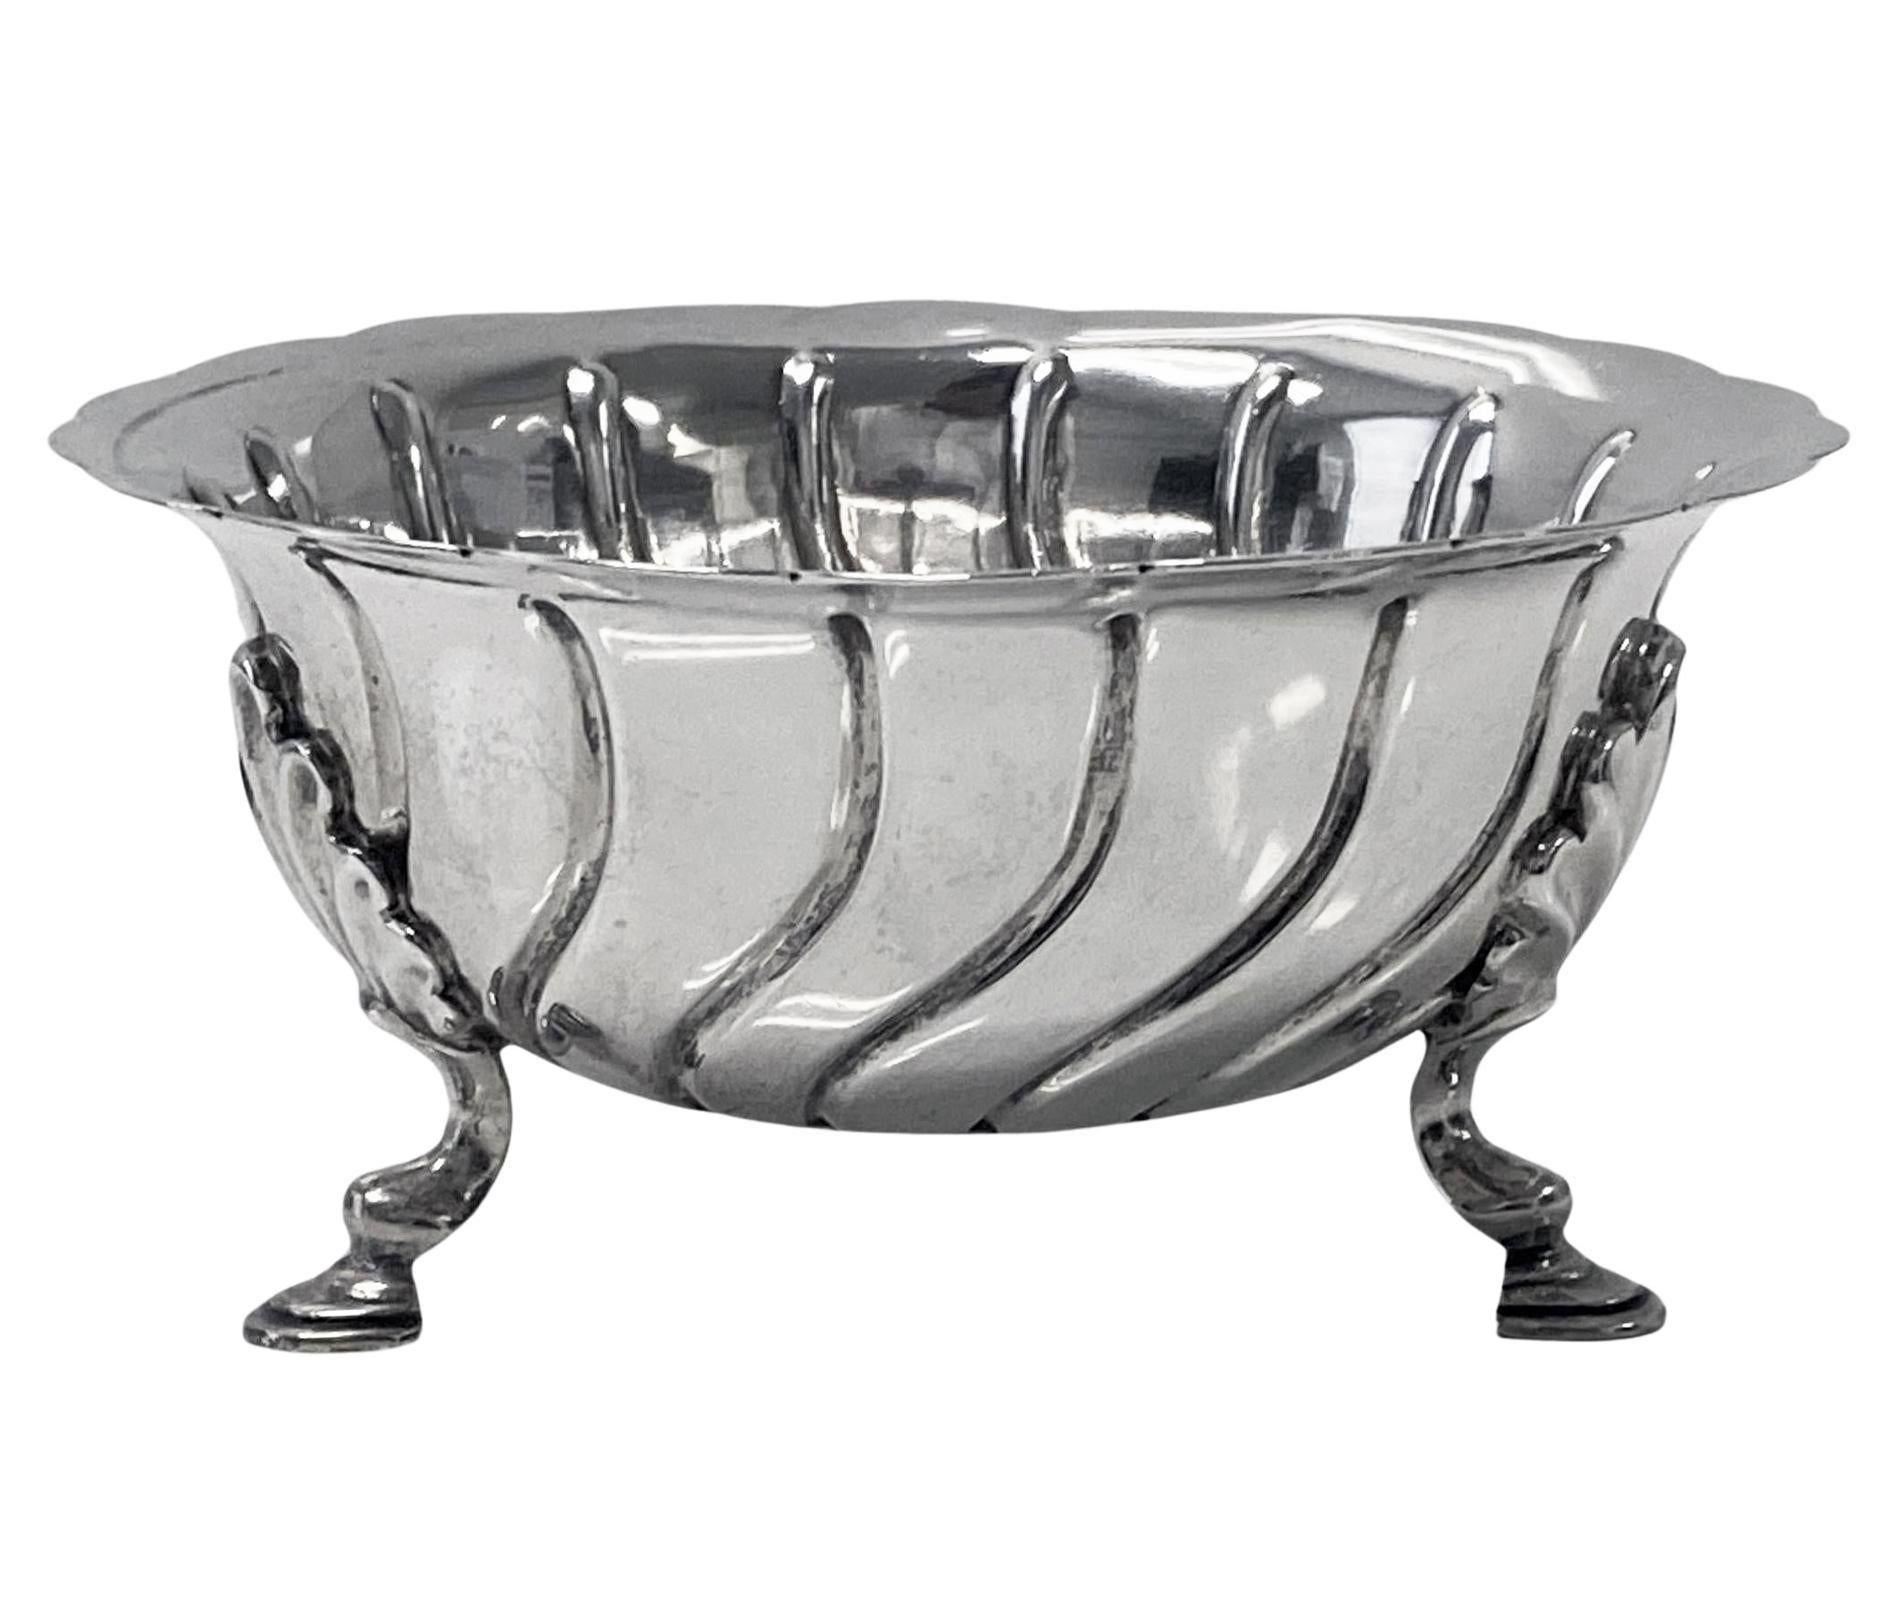 Antique Silver Sugar Bowl London 1899 Barnard. The circular bowl in Irish 18th century style on raised on three shell knuckle mask feet, swirl design surround body, scalloped everted rim. Diameter: 4.75 inches. Height: 2.25 inches. Weight: 169